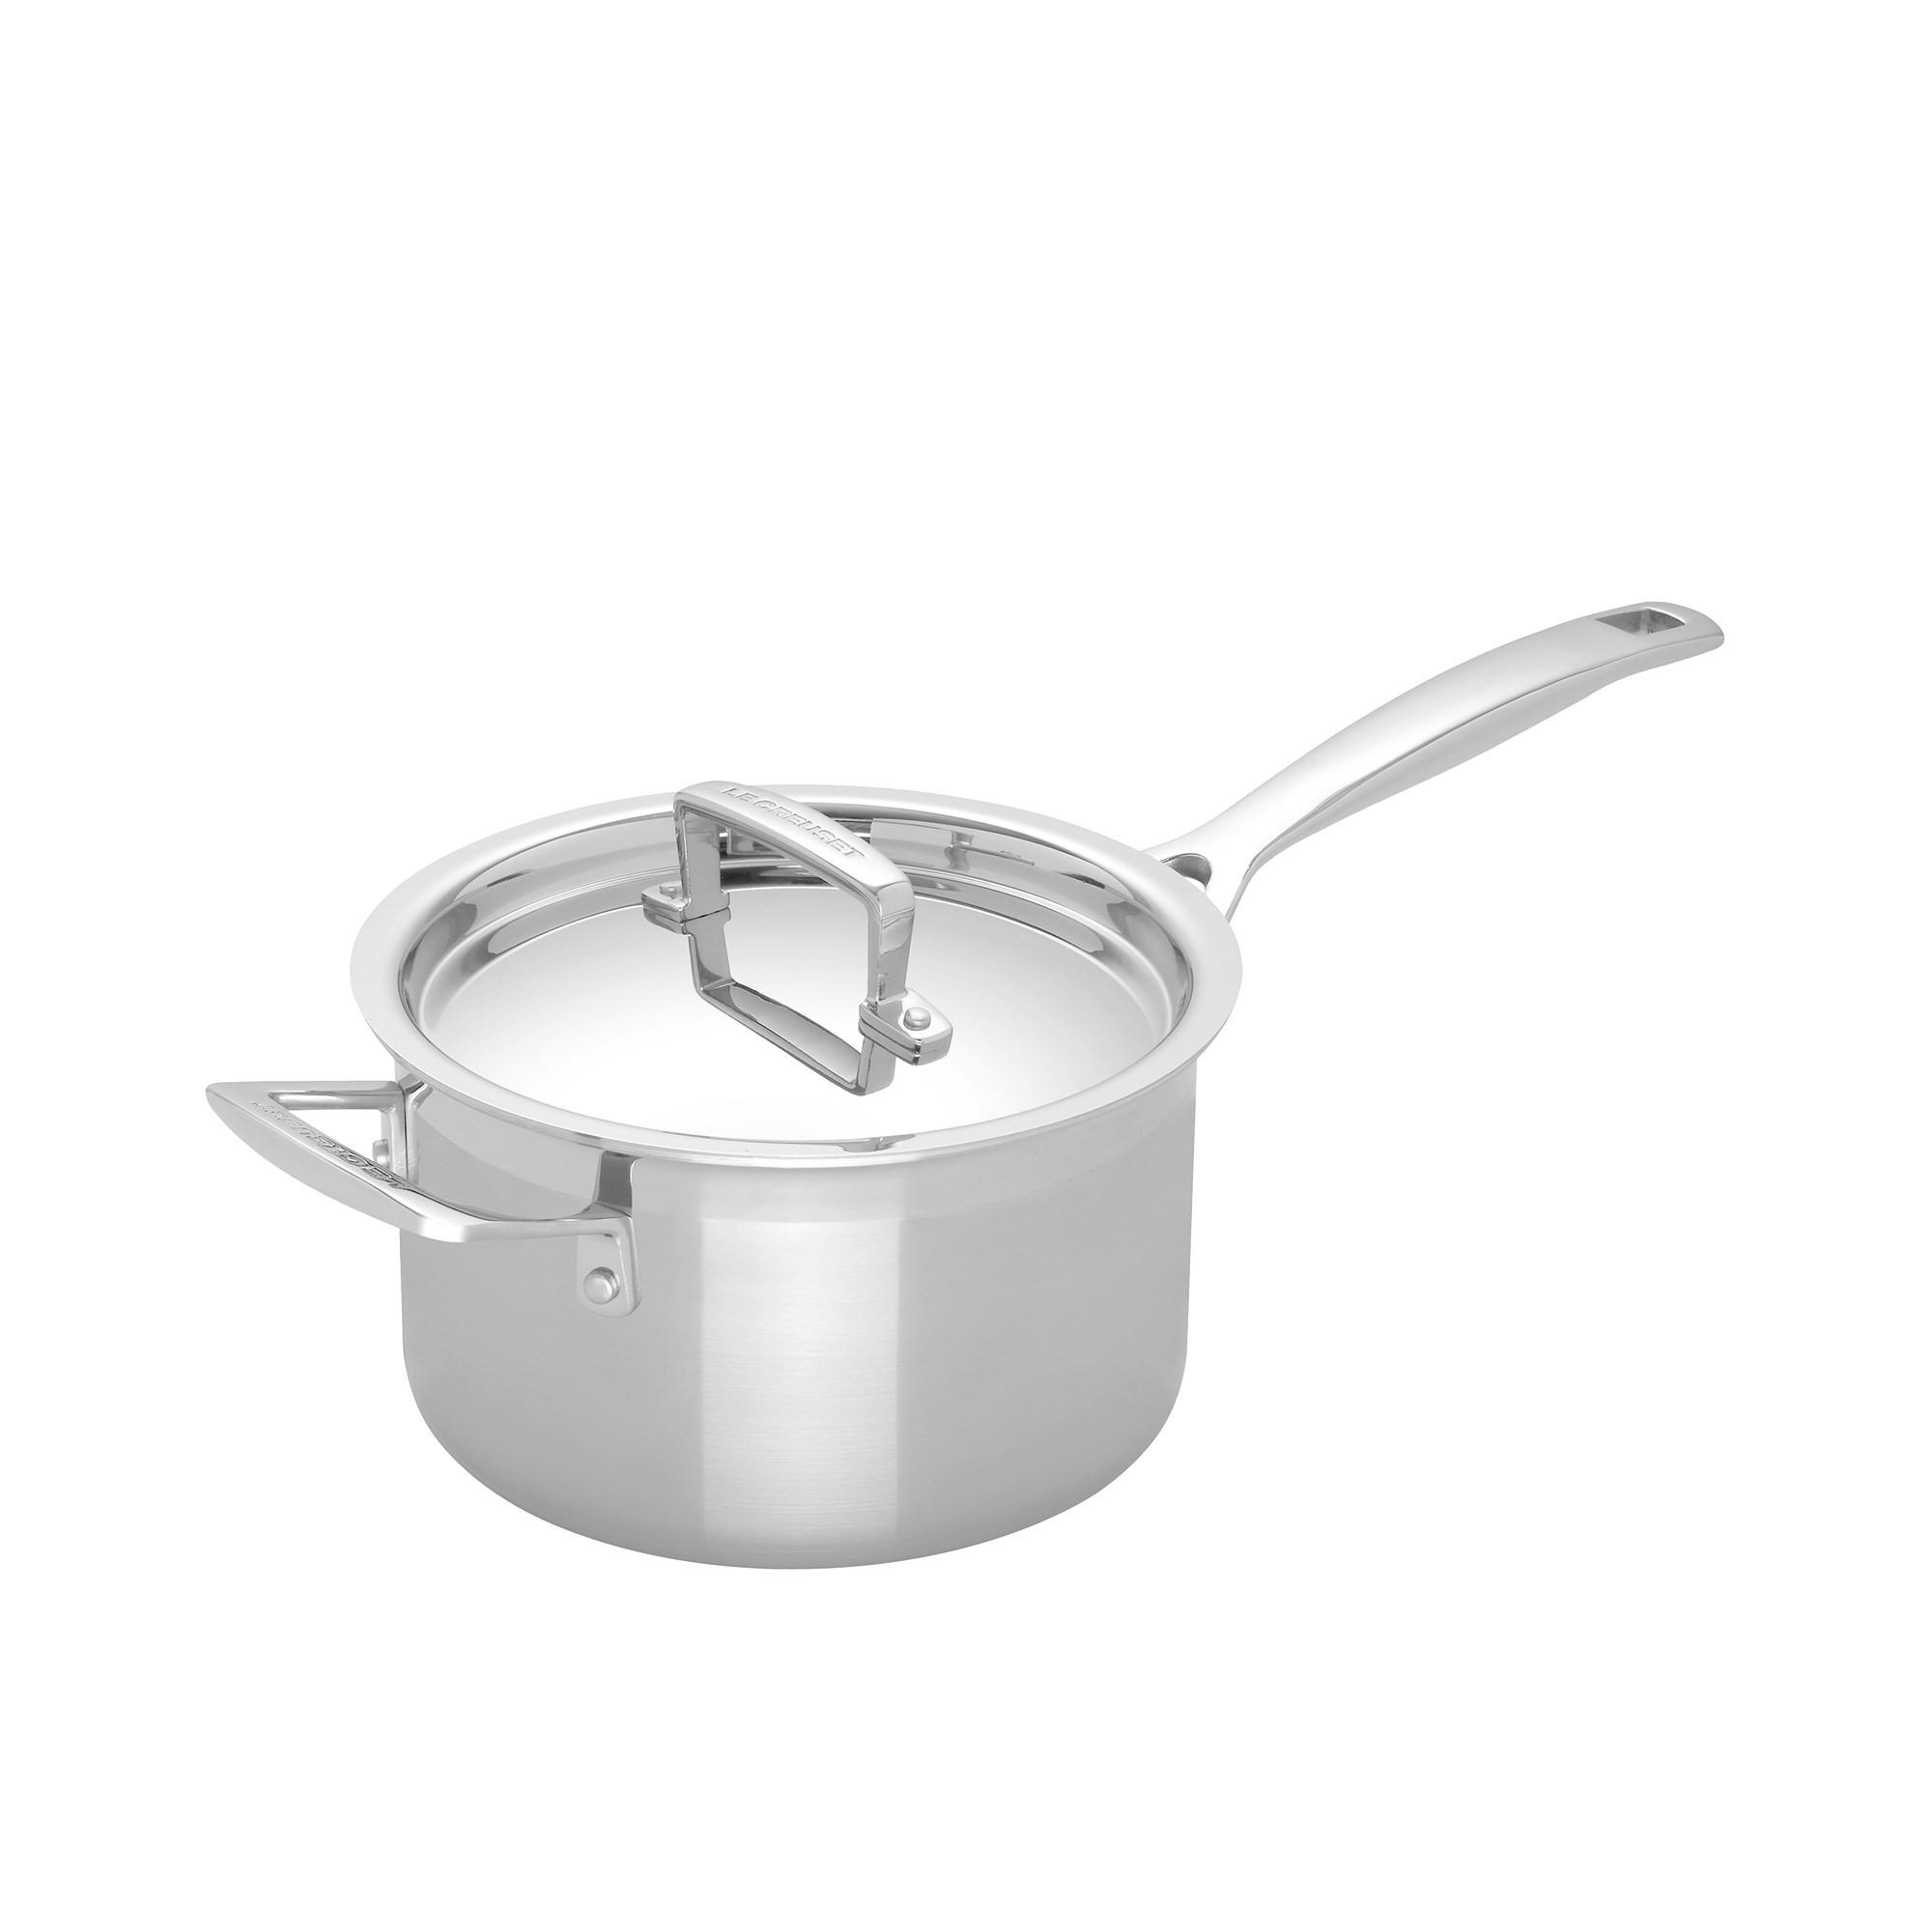 Le Creuset 3-Ply Stainless Steel Saucepan with Lid 18cm - 2.8L Image 1